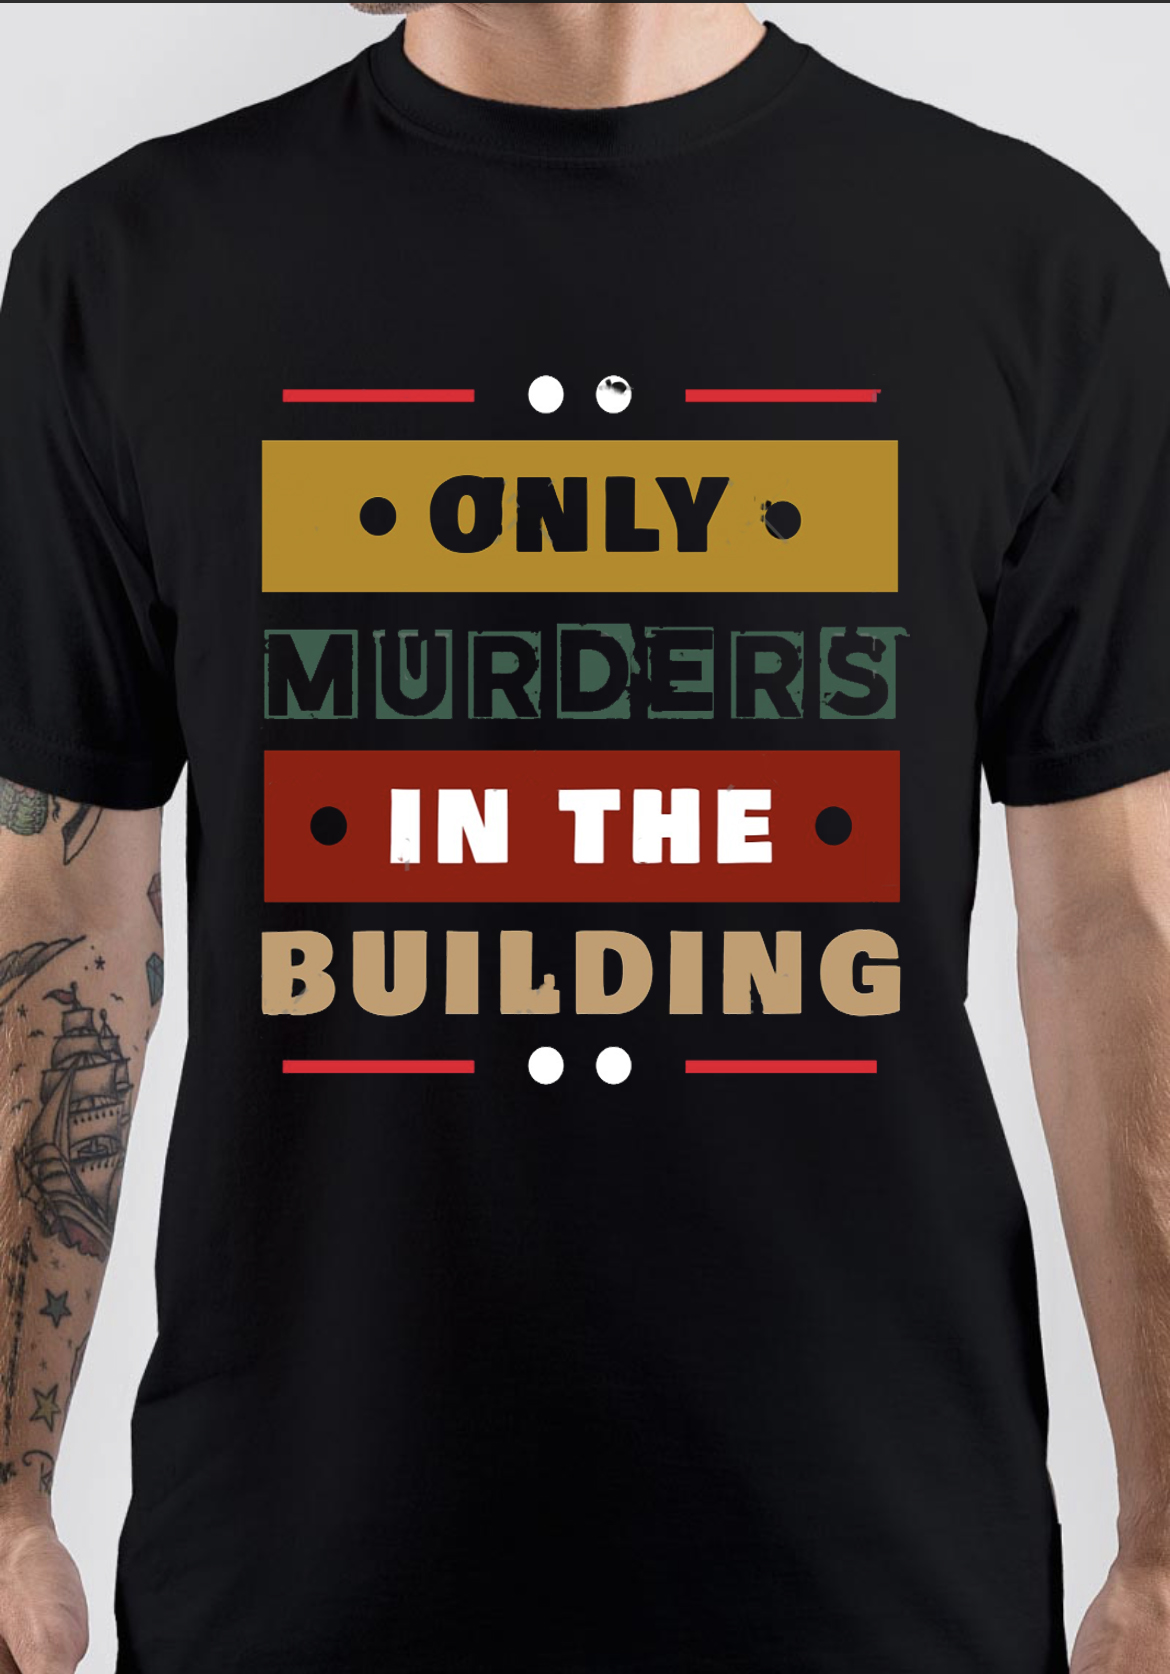 Only Murders T-Shirt And Merchandise